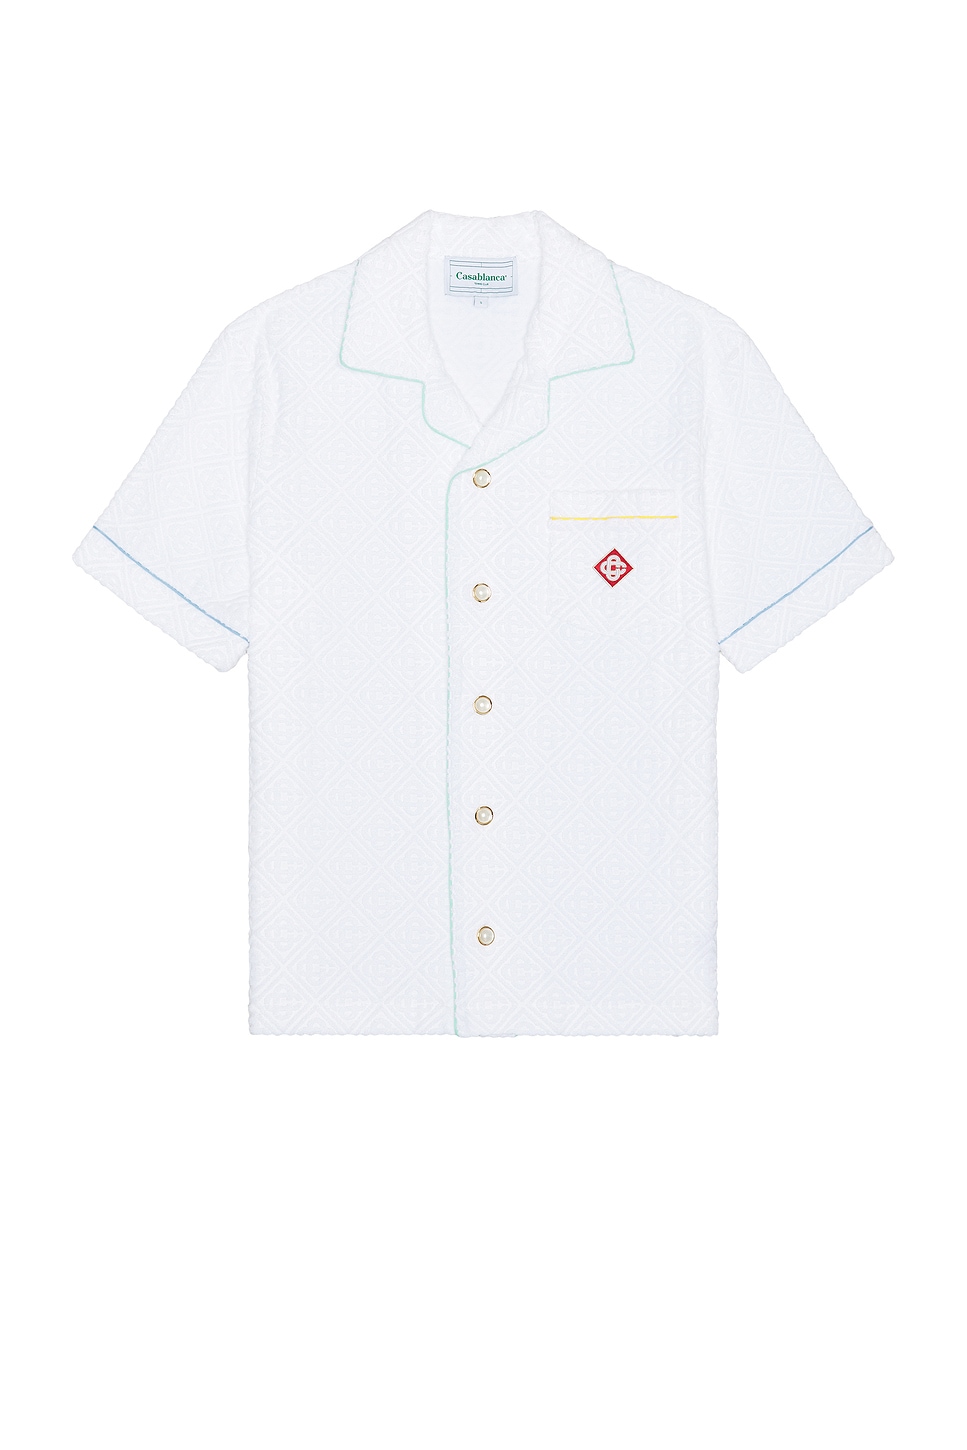 Image 1 of Casablanca Towelling Short Sleeve Shirt in White